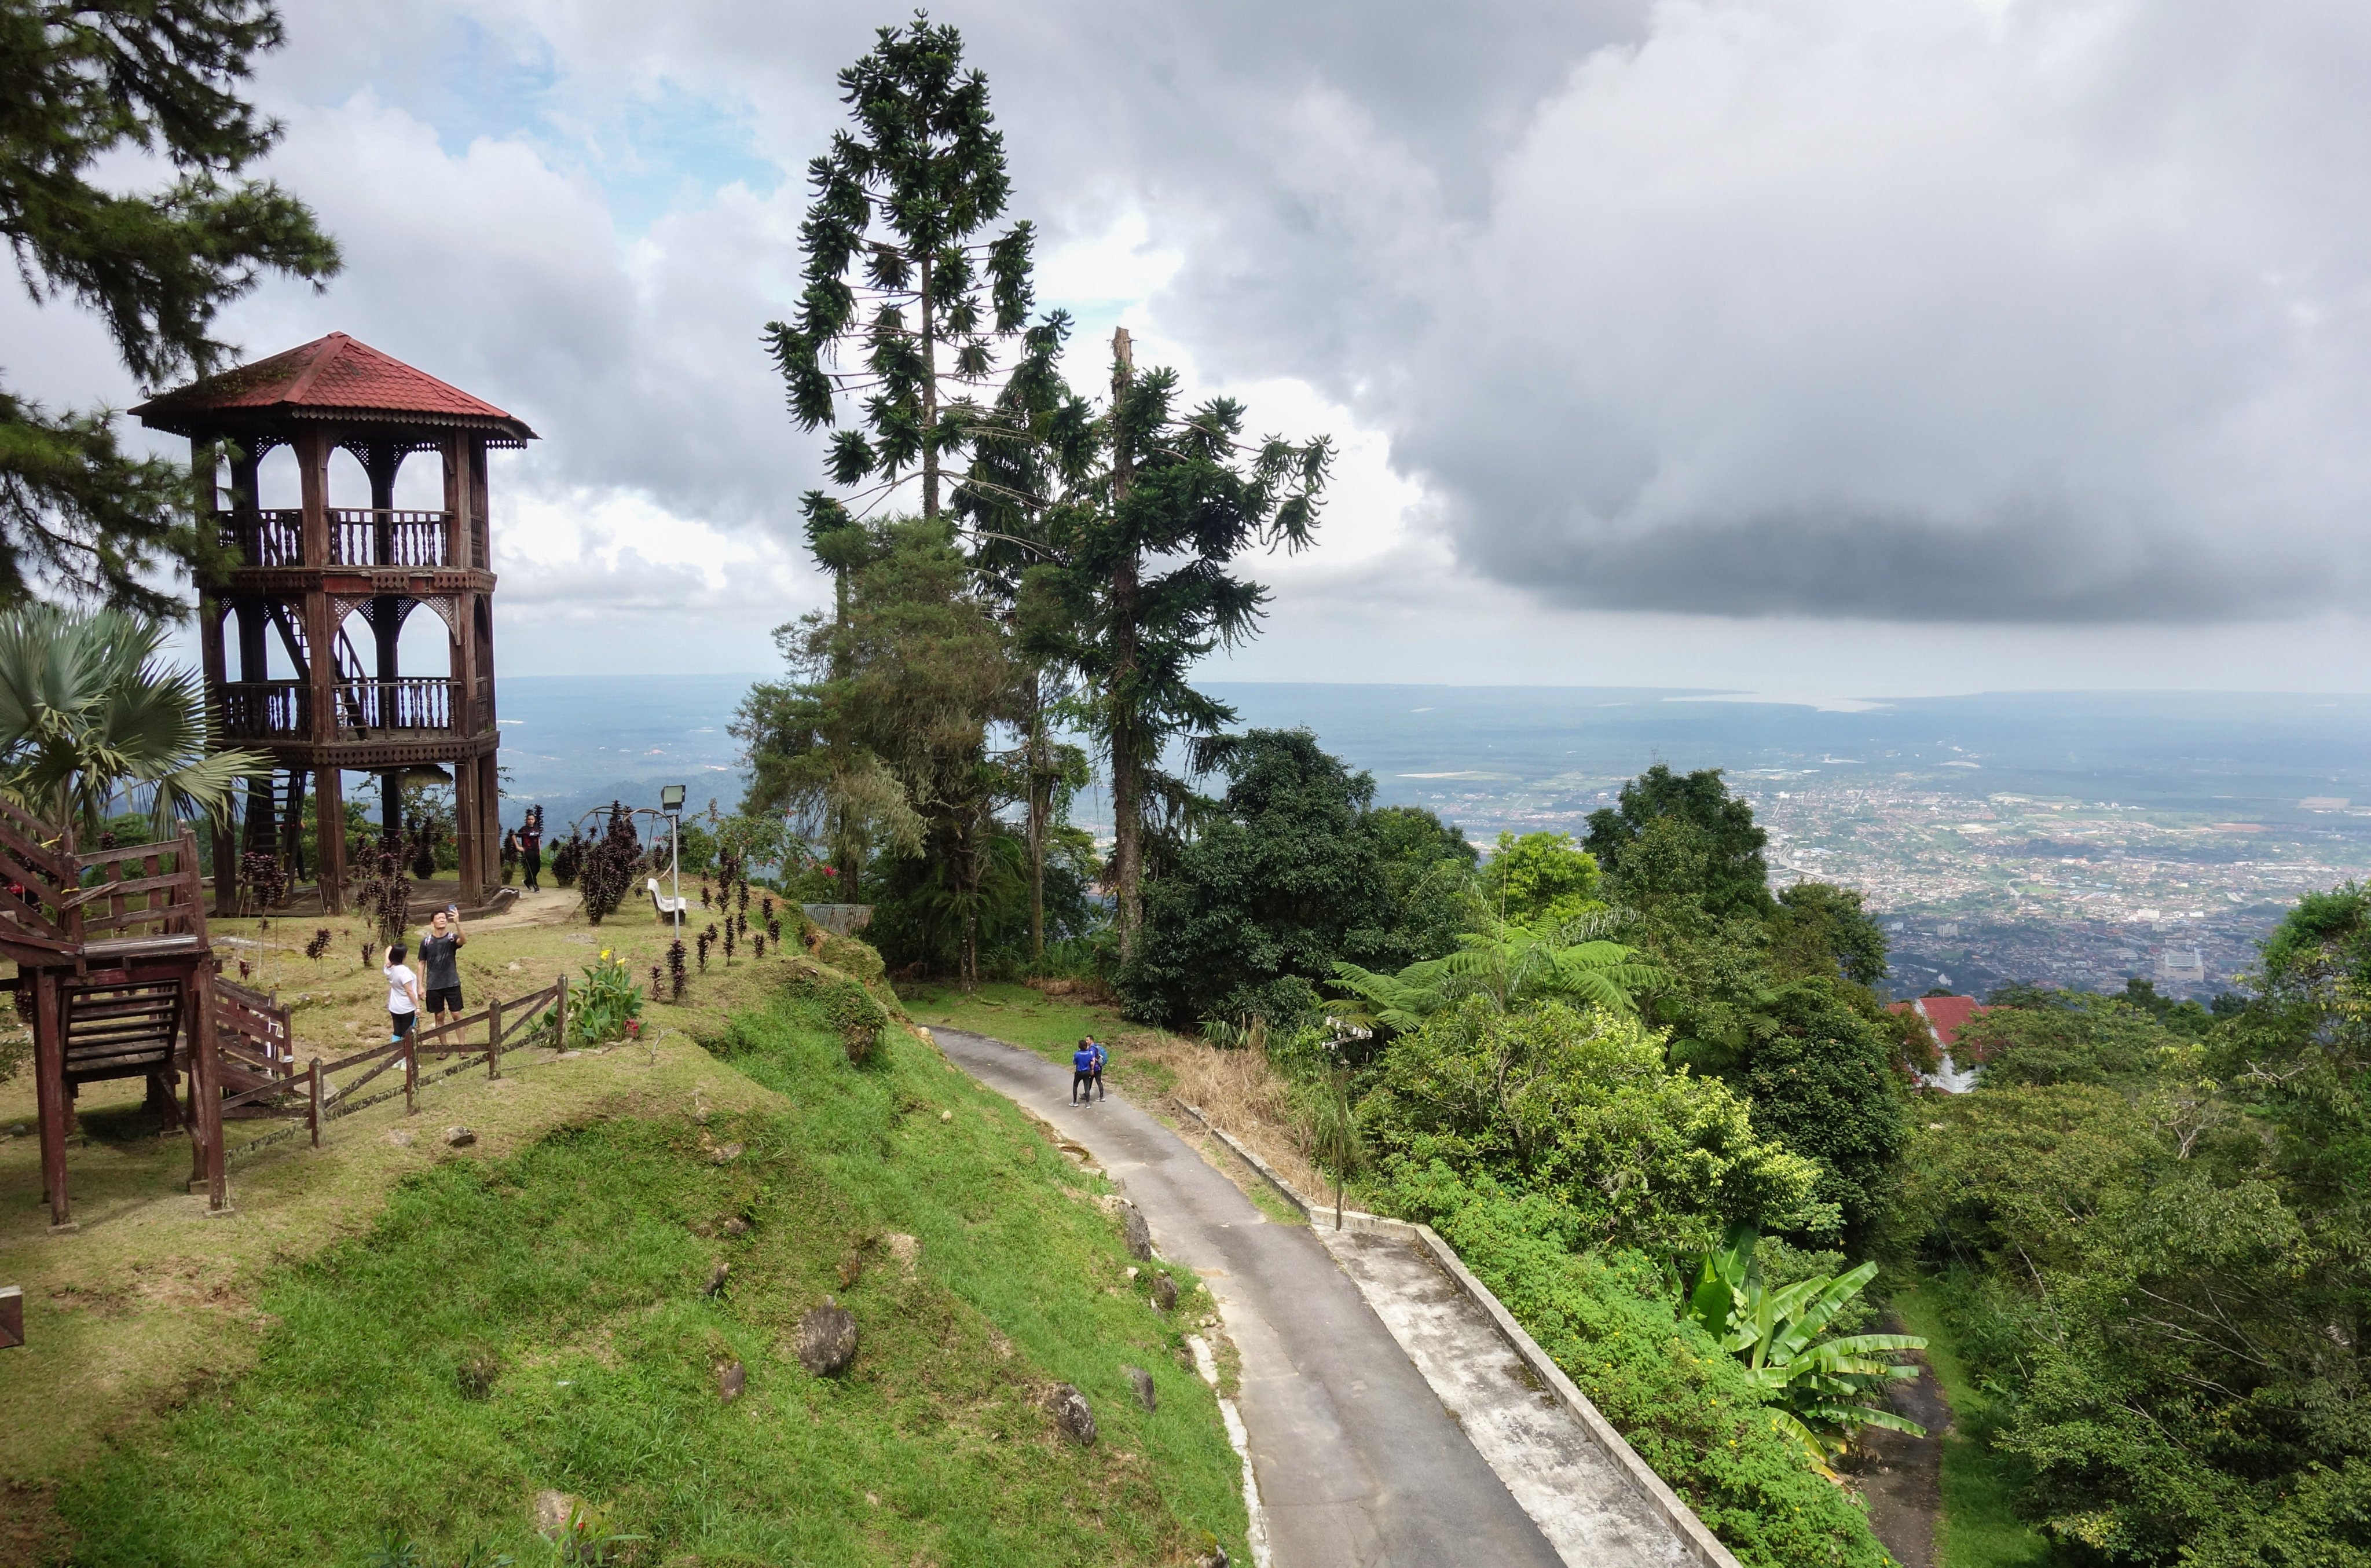 Three new hiking trails of 8km, 10km and 14km take hikers to the top of Maxwell Hill, in Taiping, in Malaysia’s Perak state. Photo: Marco Ferrarese